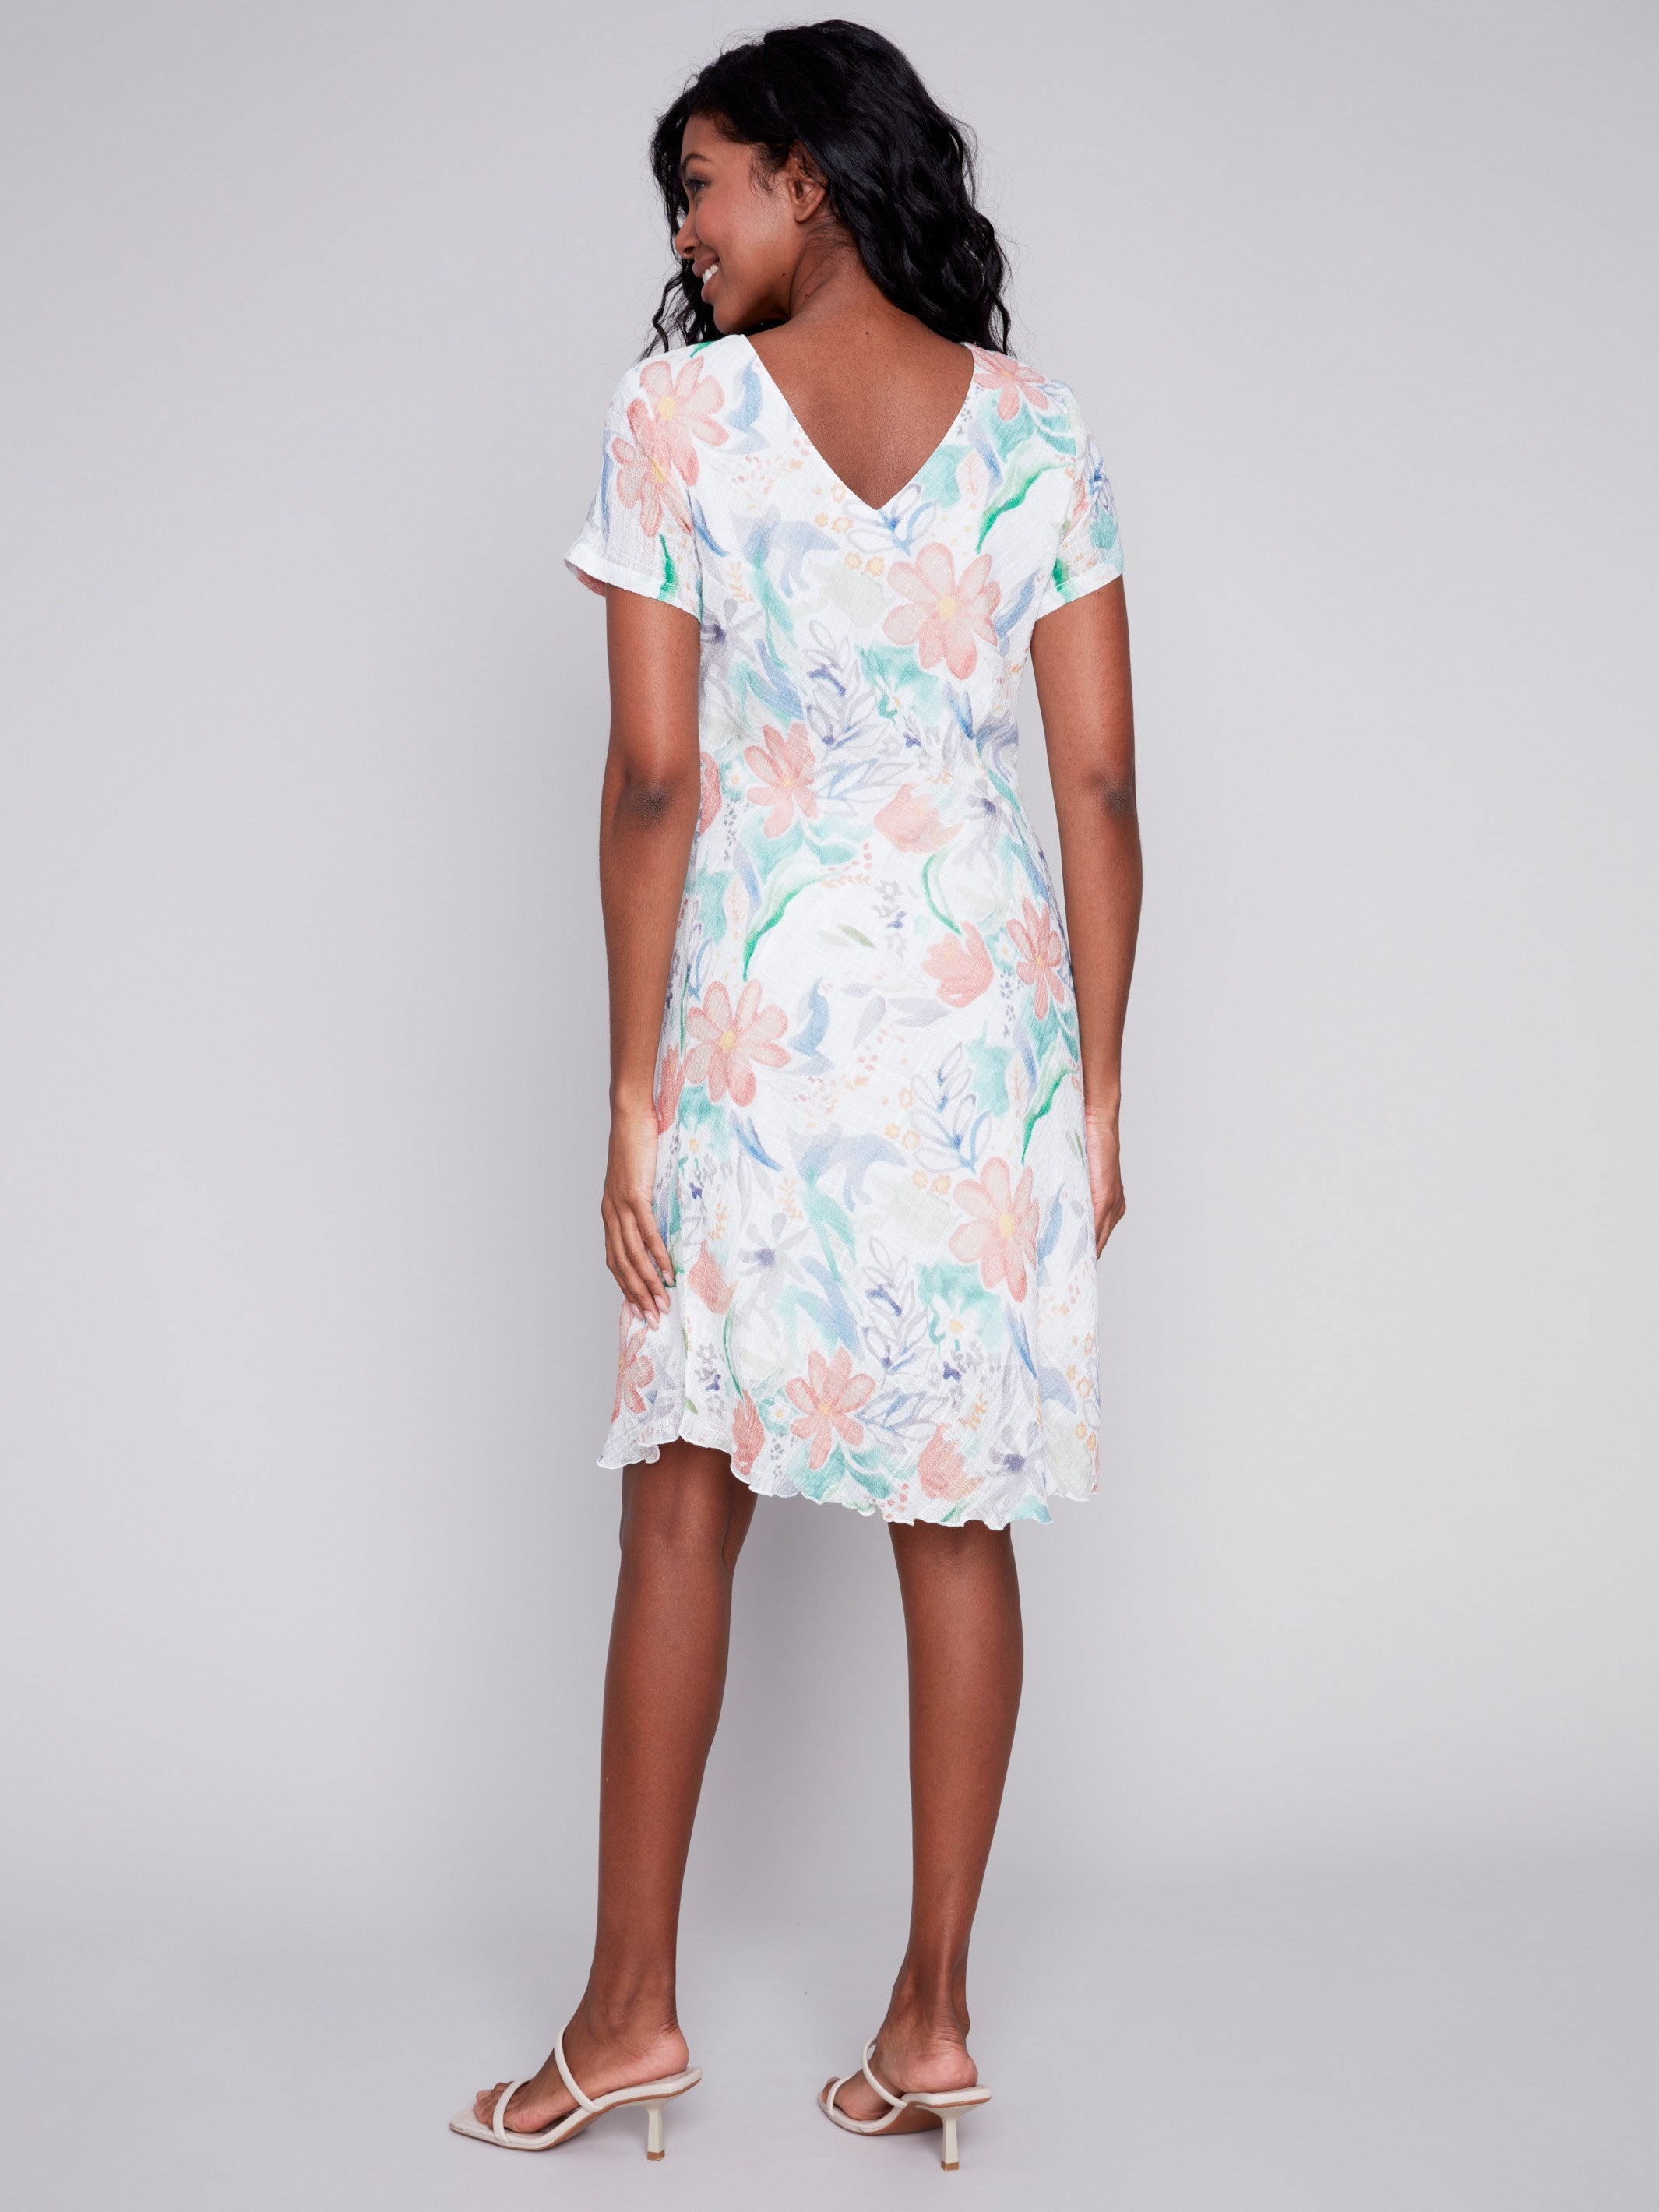 Cotton Gauze Dress with Bias Cut - Lotus - Charlie B Collection Canada - Image 4